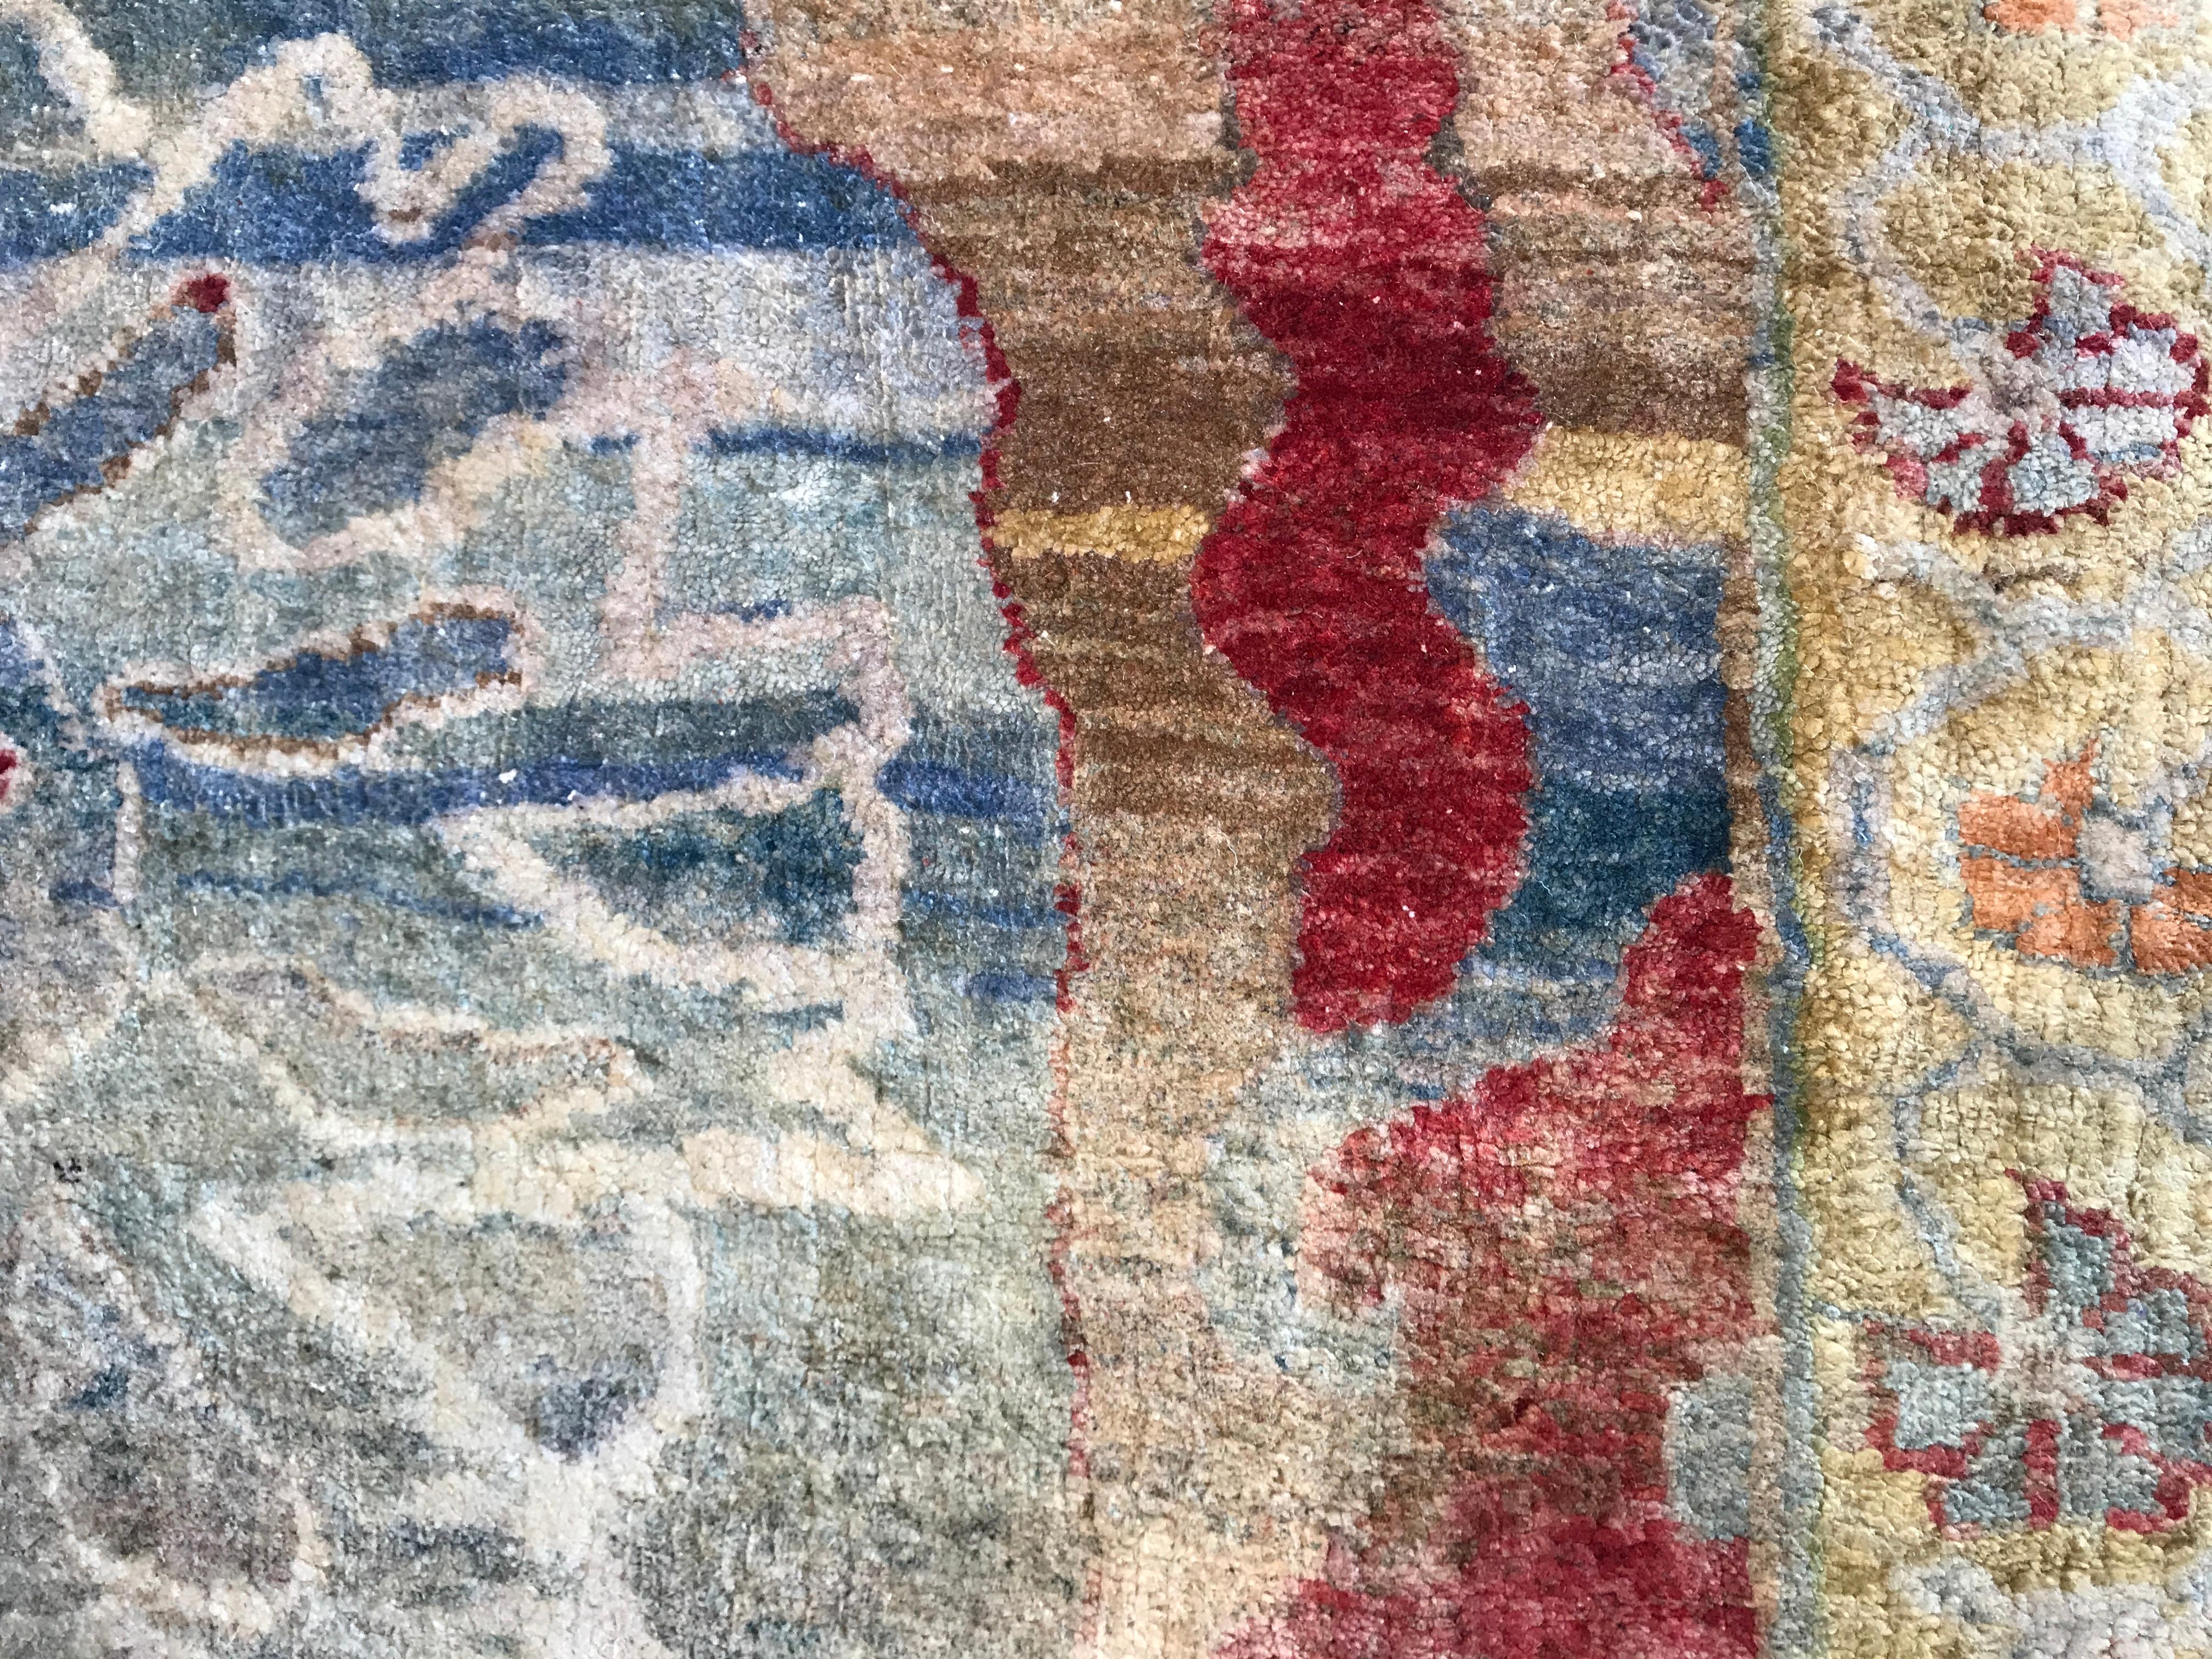 Arts and Crafts Arts & Crafts Inspired Hand-Knotted Rug Made with 100% Handspun Cocoon Silk For Sale